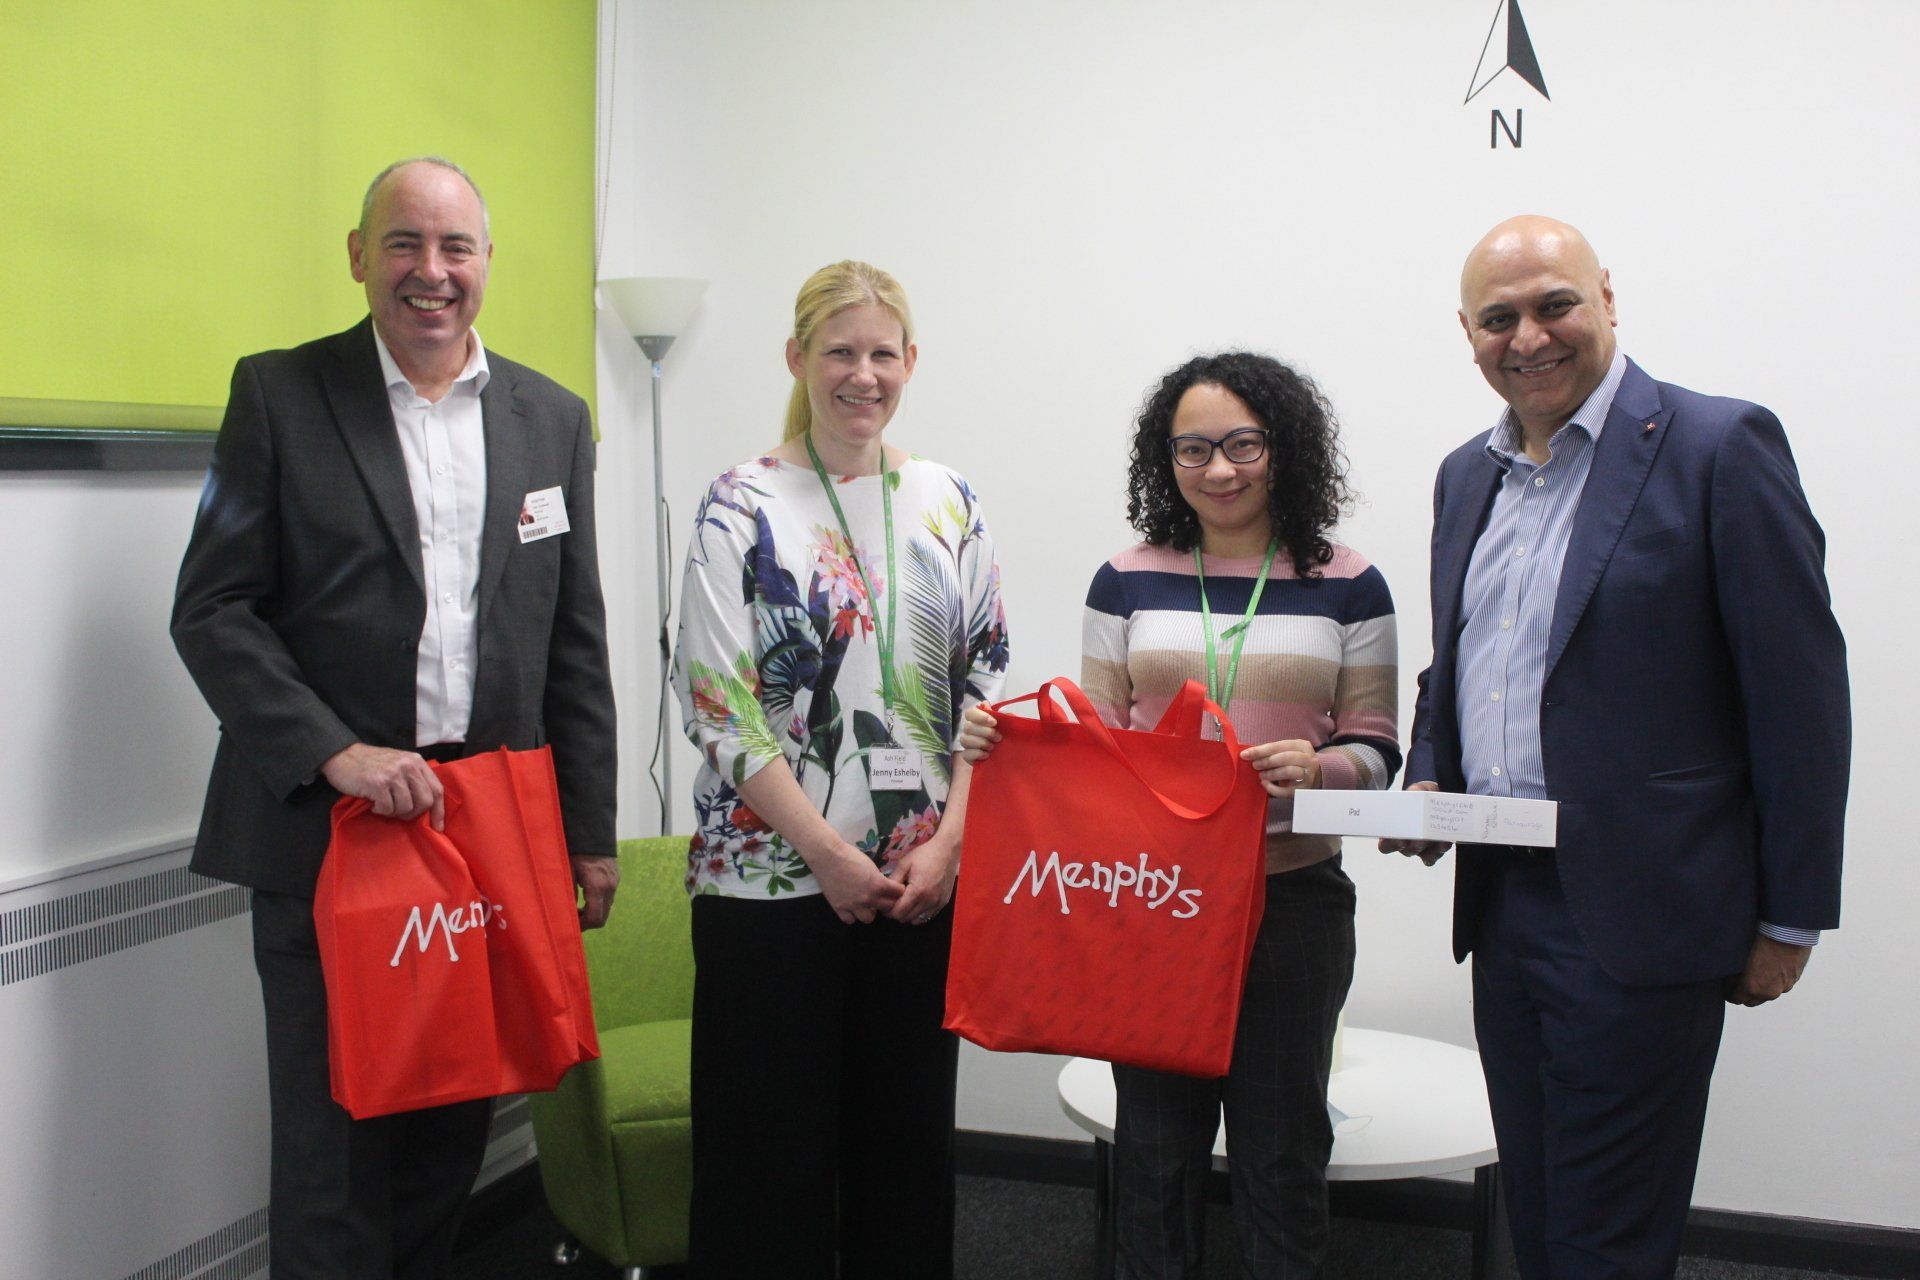 50 Tablets for Disabled Youngsters thanks to the Randal Charitable Foundation and Manphys